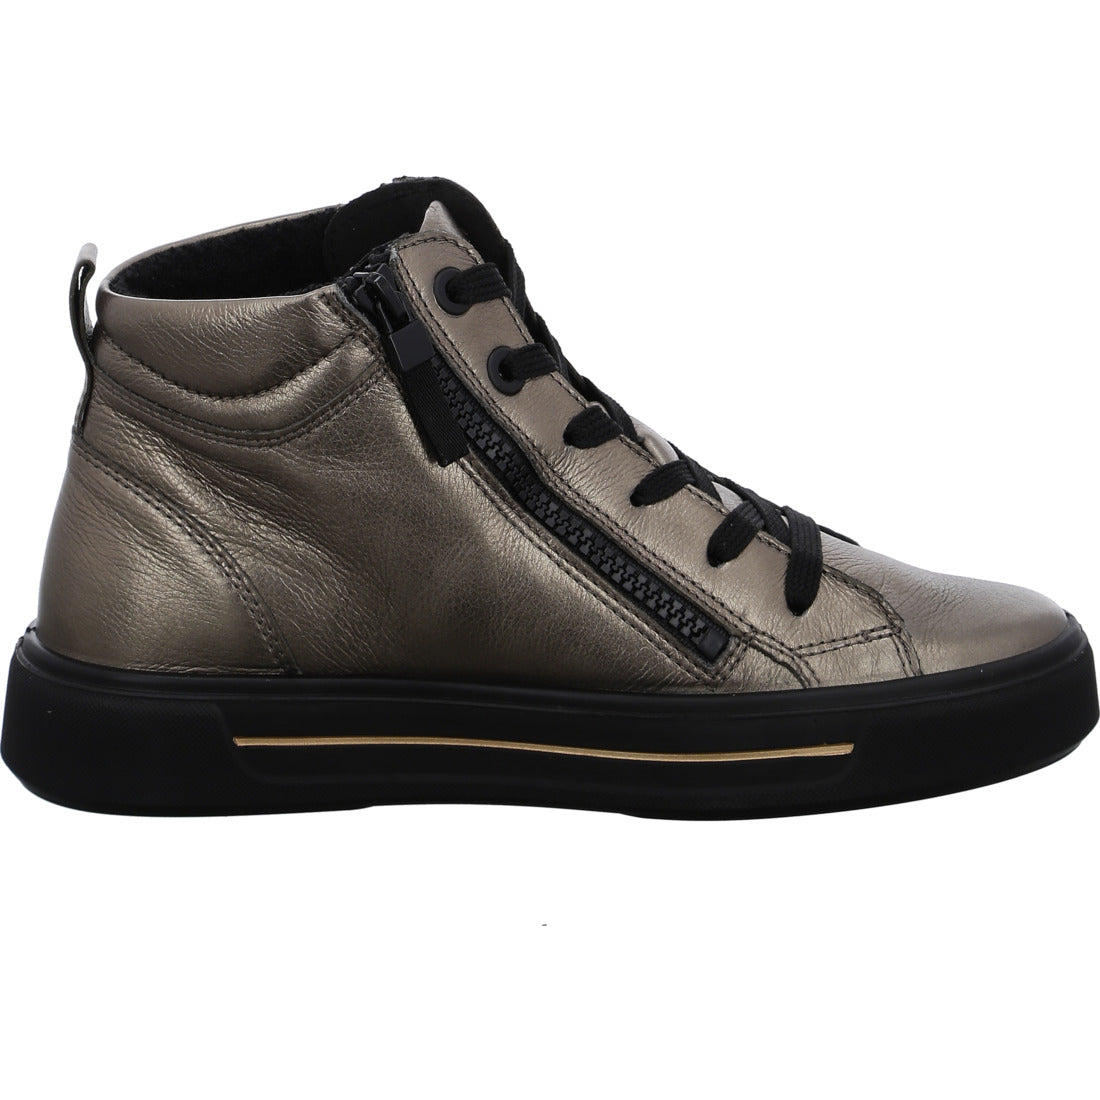 COURTYARD 2.0 LEATHER BOOTS LUP ZIP